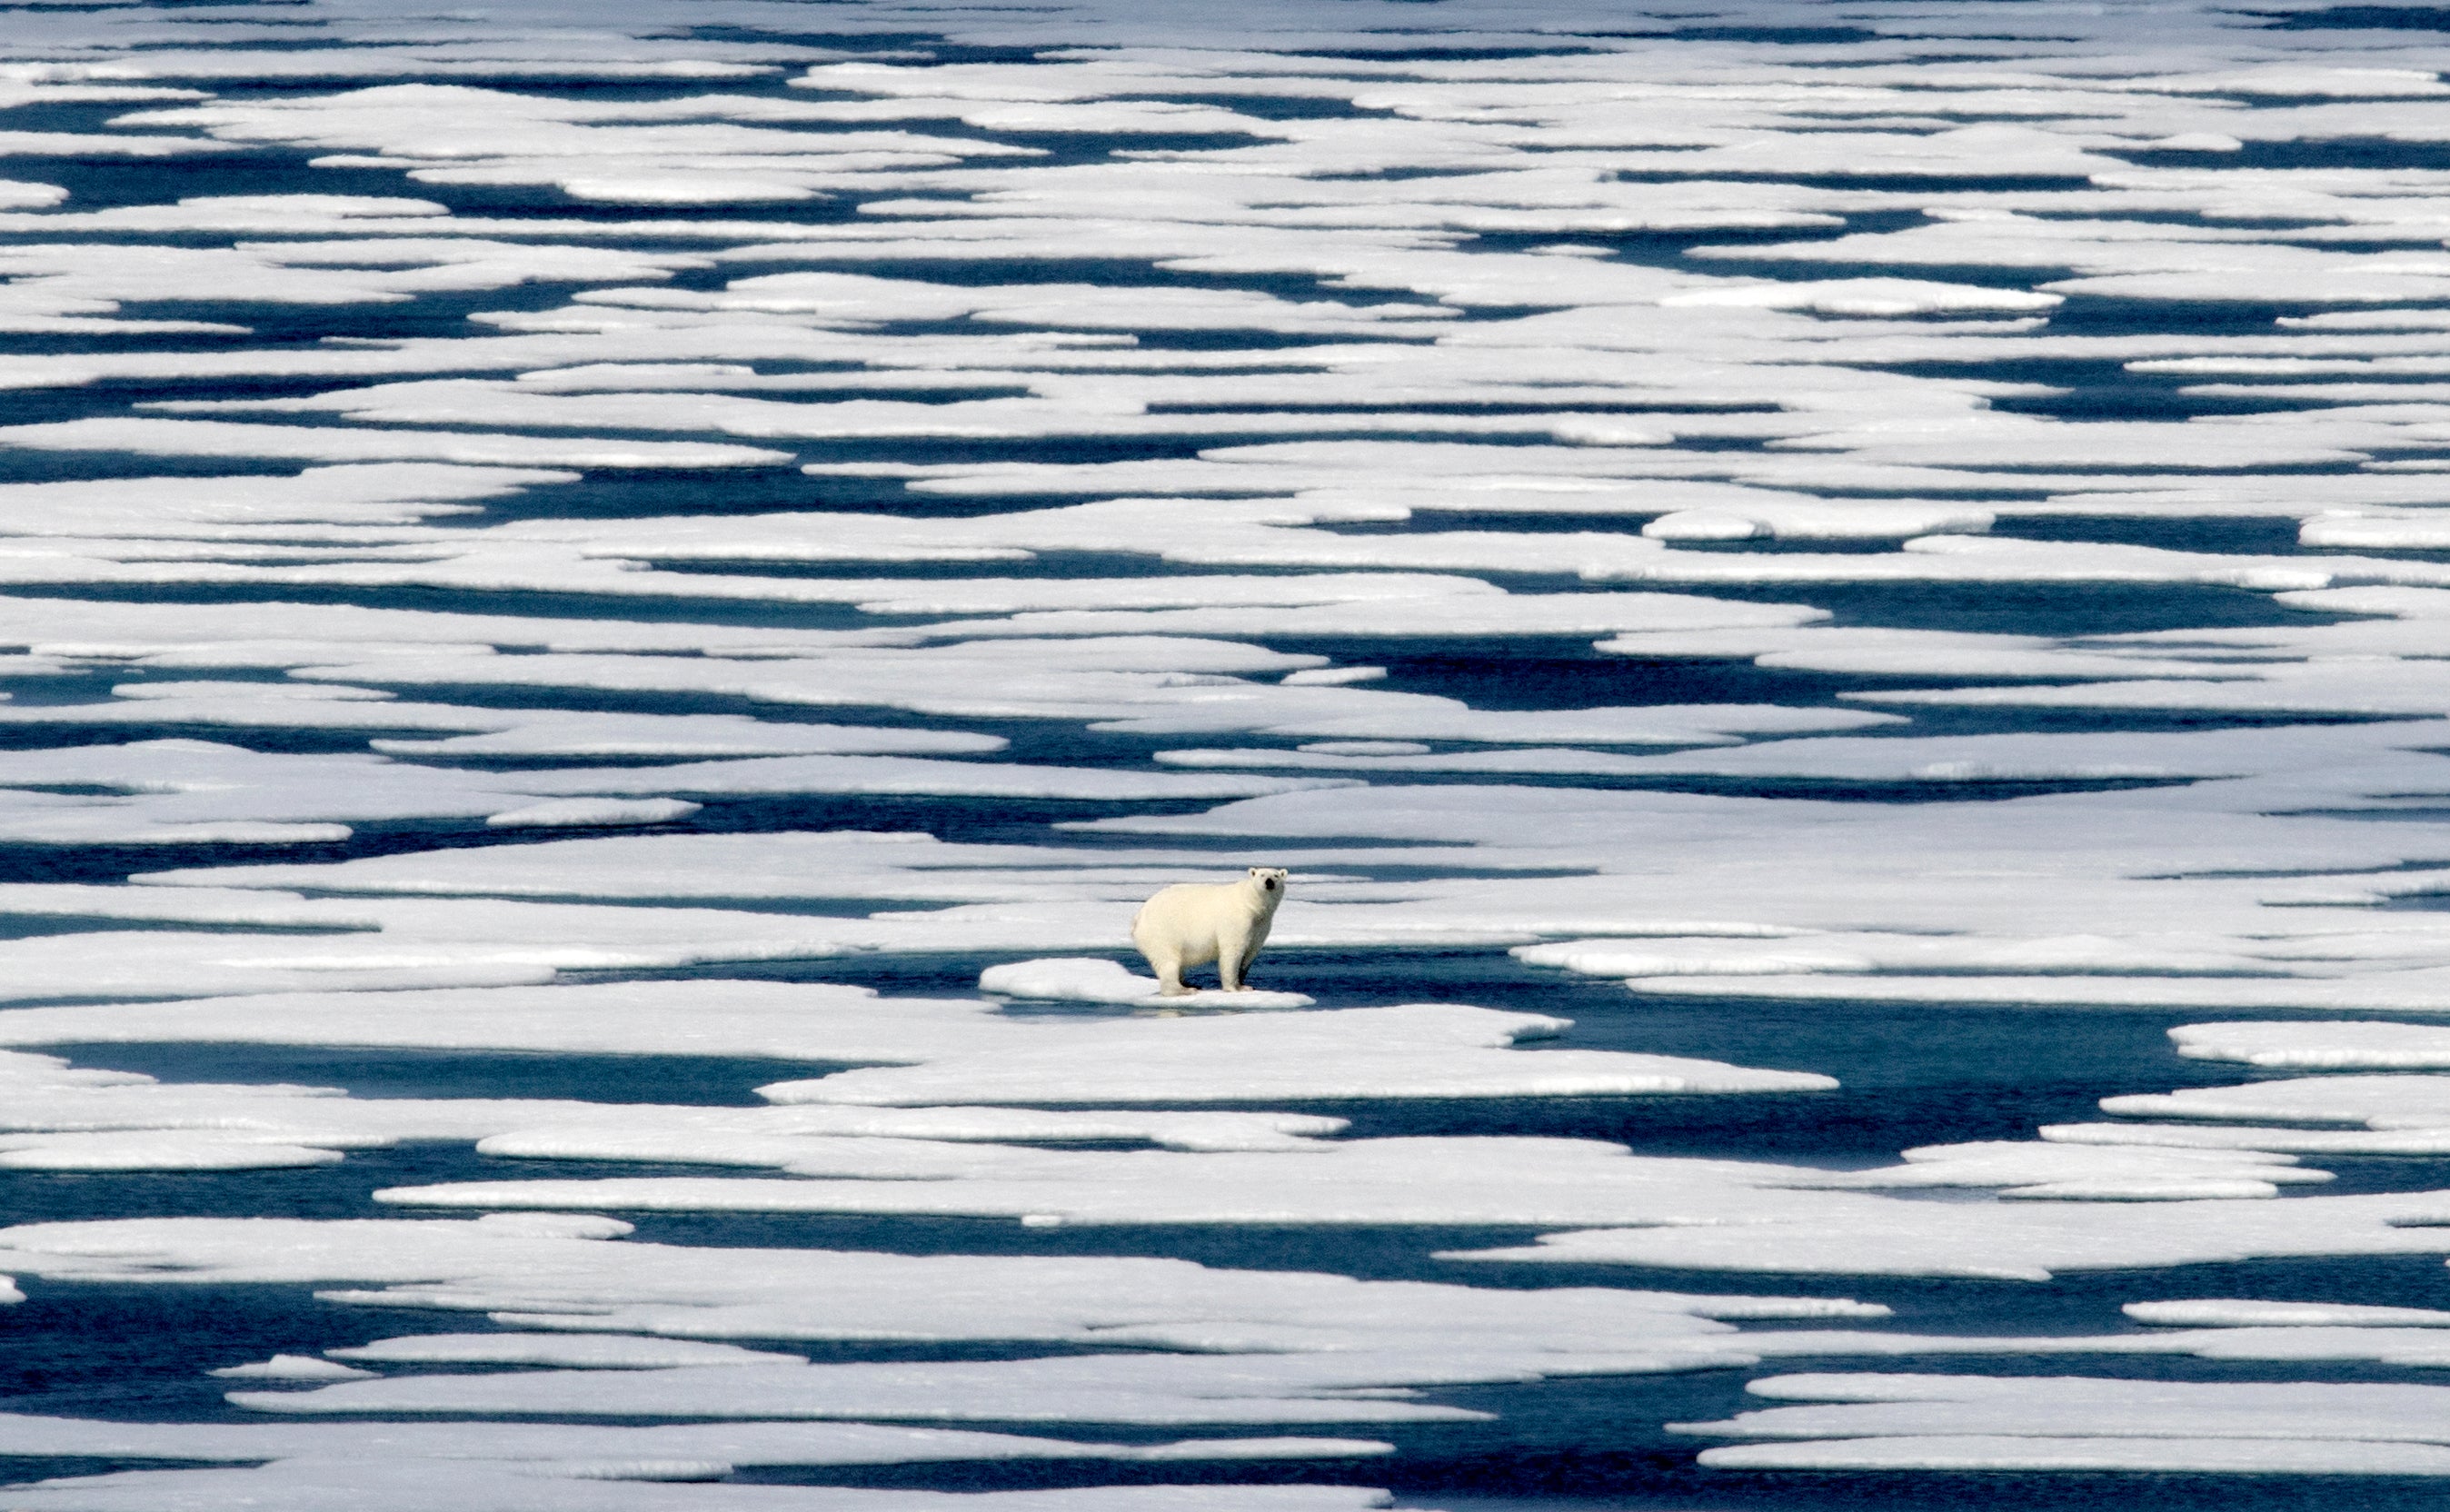 A polar bear stands on the ice in the Franklin Strait in the Canadian Arctic archipelago